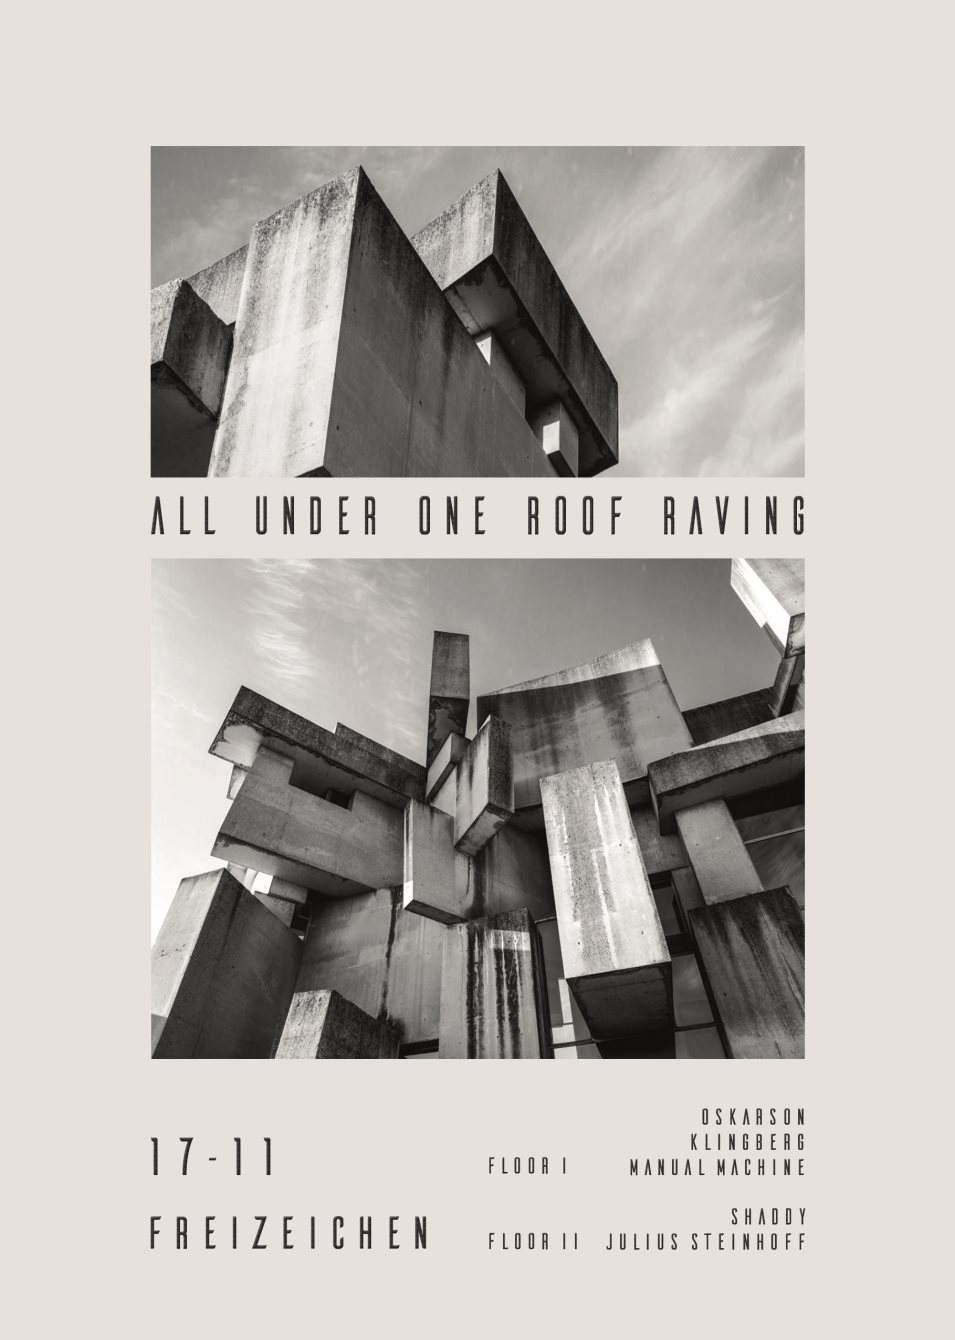 All Under One Roof Raving - フライヤー裏